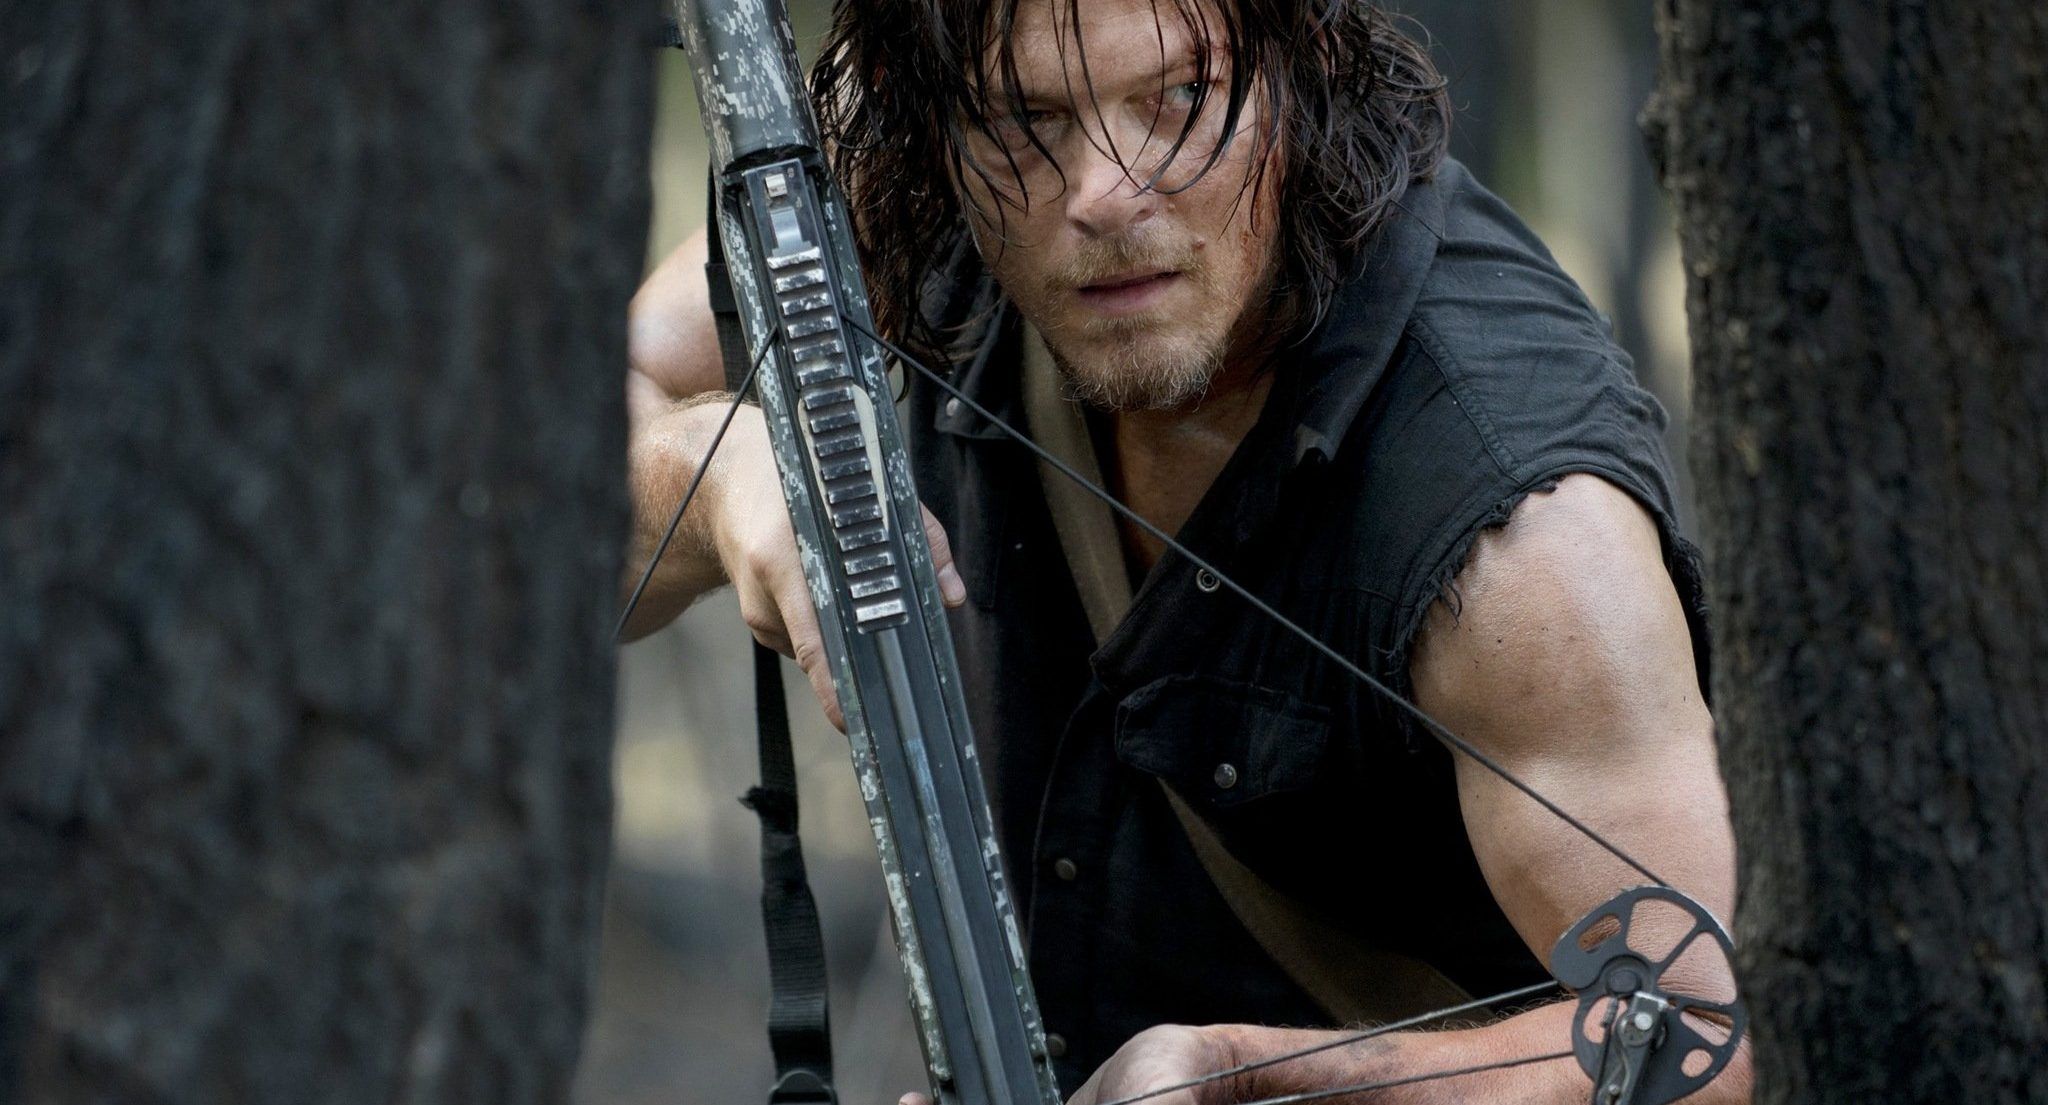 How Well Do You Know The Walking Dead